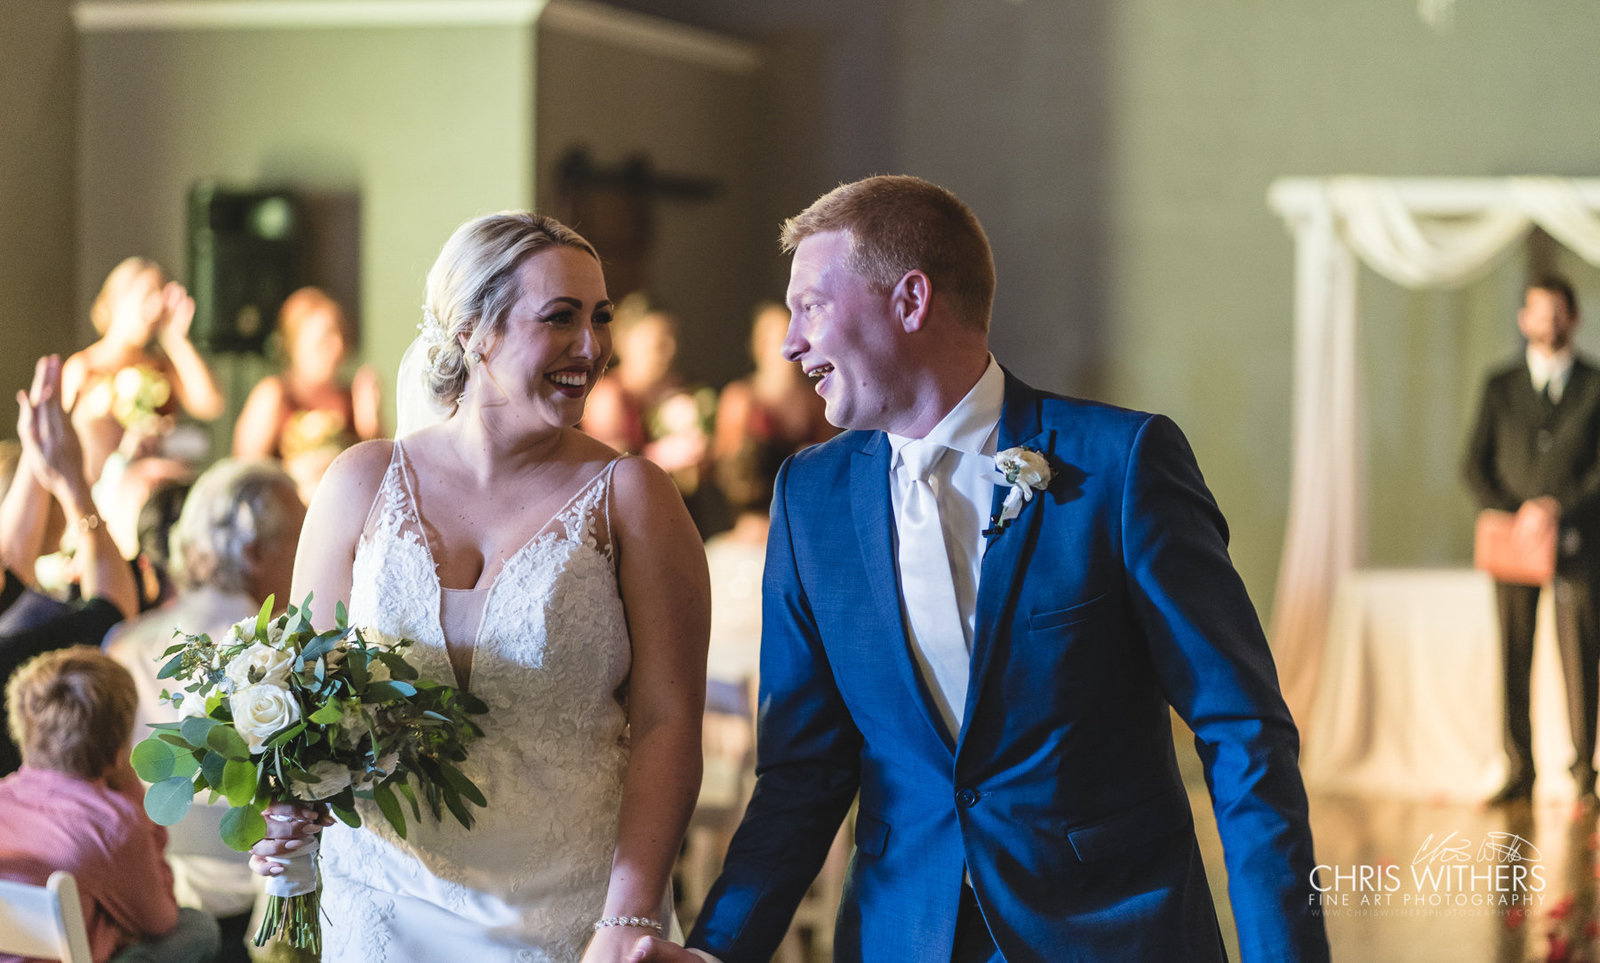 Springfield Illinois Wedding Photographer - Chris Withers Photography (11 of 21)